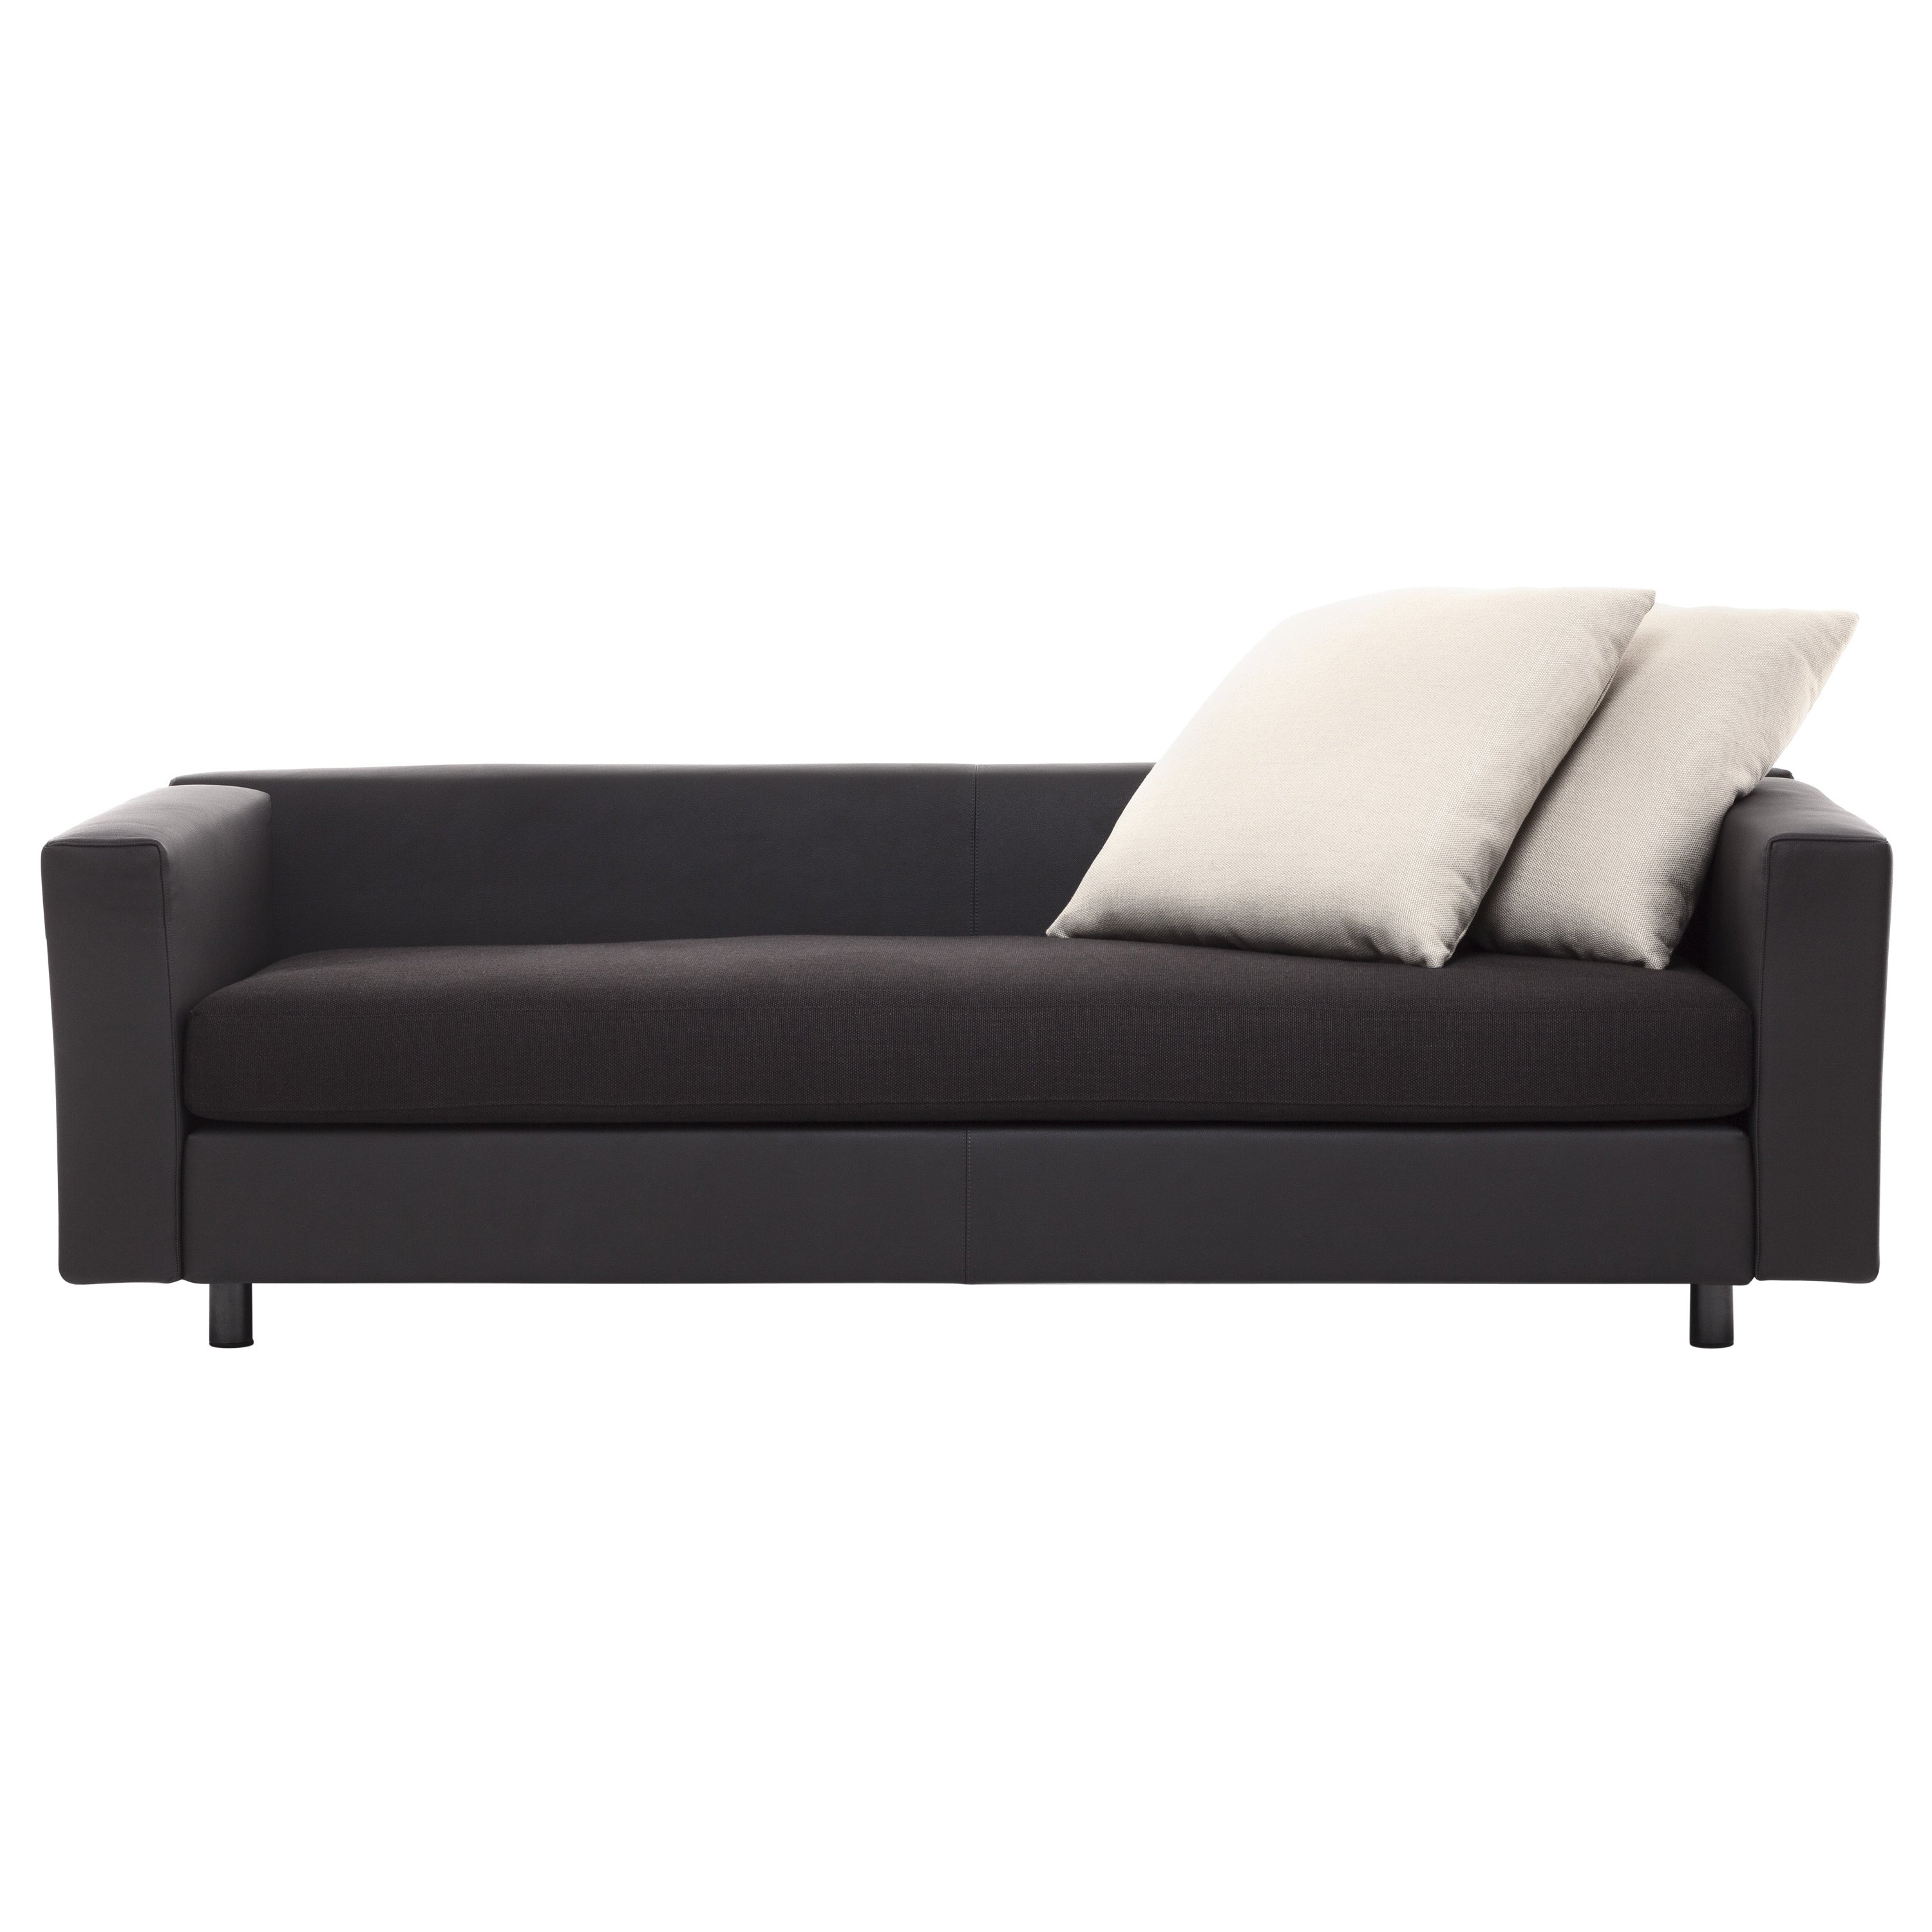 Baleri Italia Bill Sofa in Black Leather and Fabric by Hannes Wettstein For Sale